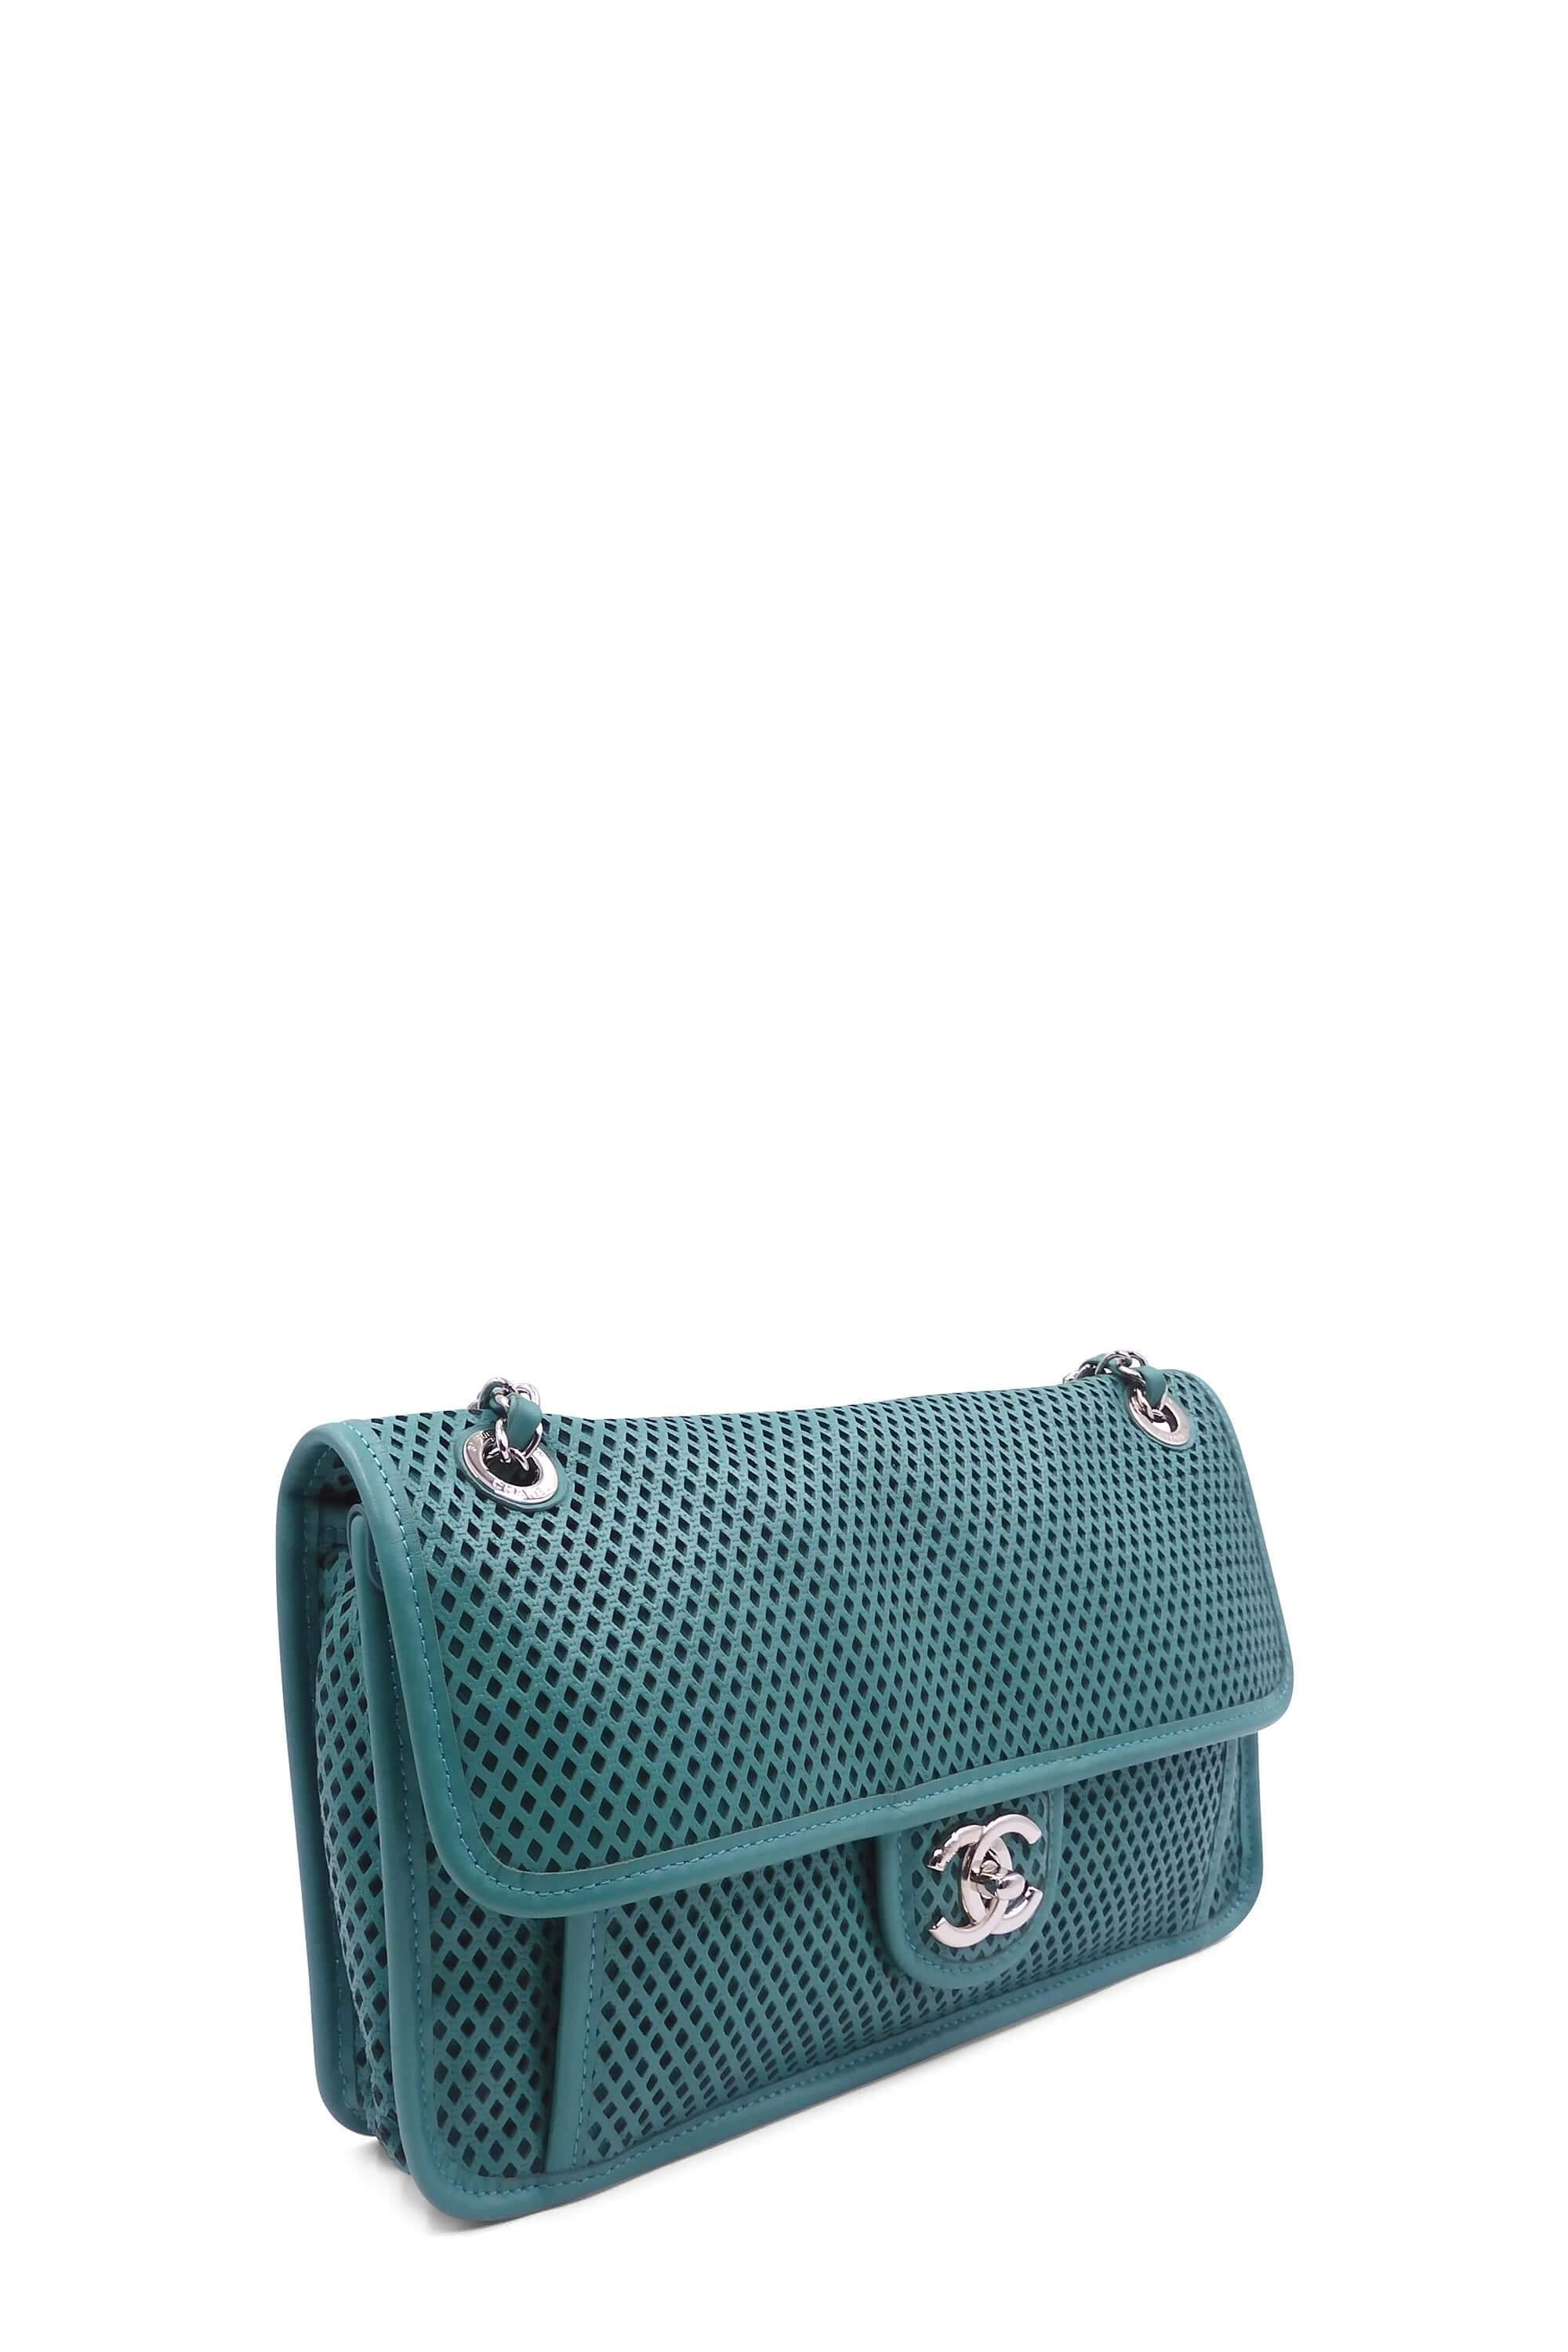 Chanel Green Up in the Air Perforated Leather Tote